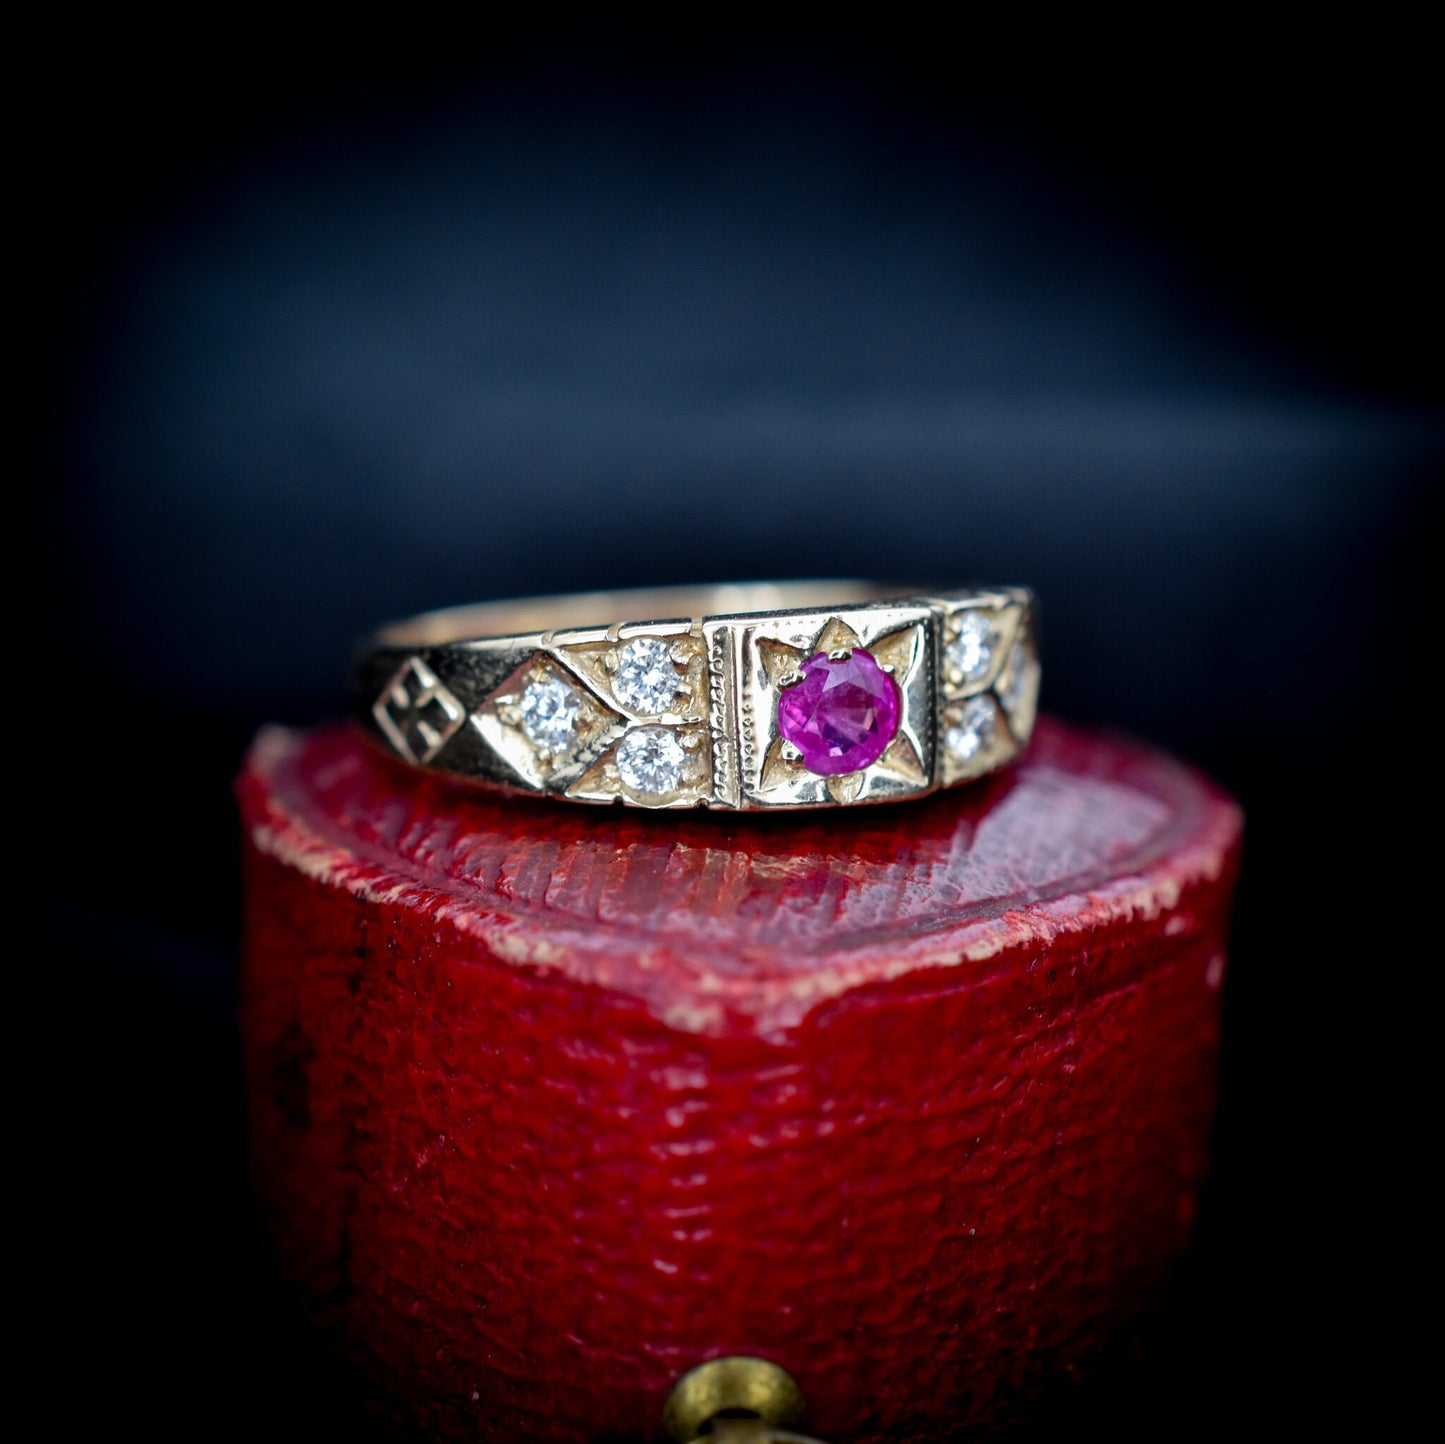 Diamond and Ruby 9ct 9K Yellow Gold Ring Band - Antique Vintage Style